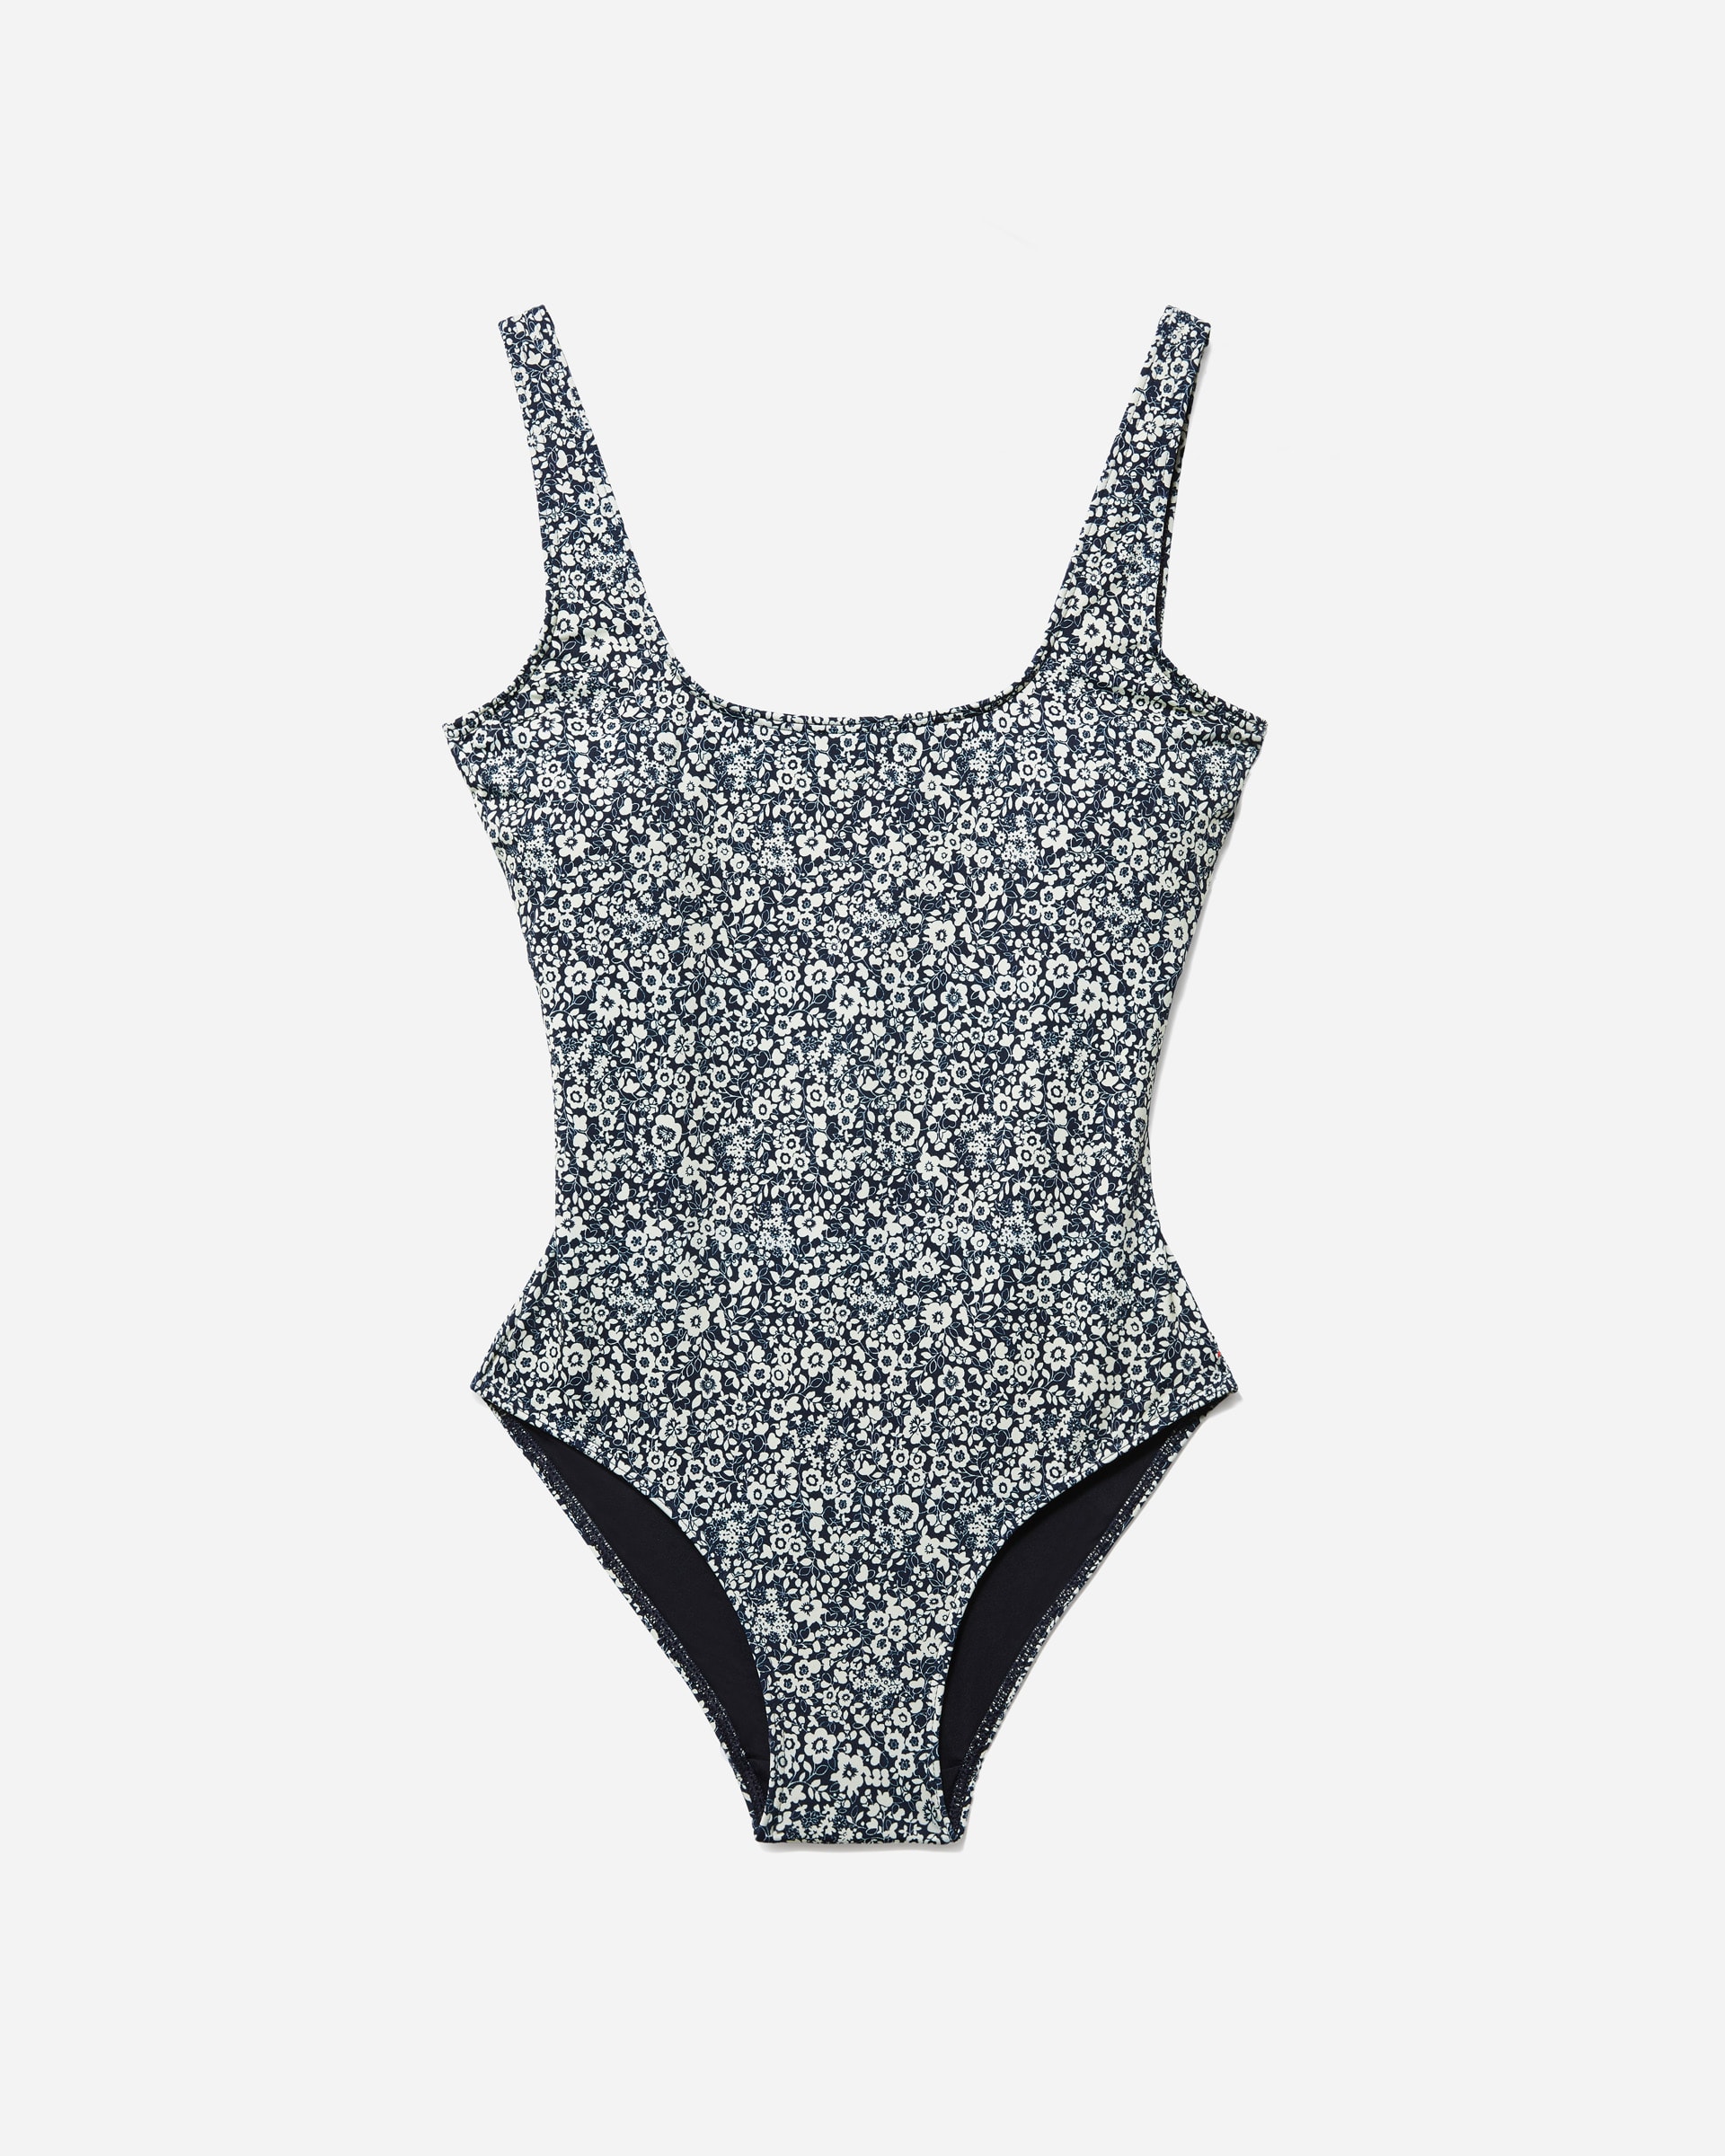 The Square-Neck One-Piece Navy Floral – Everlane